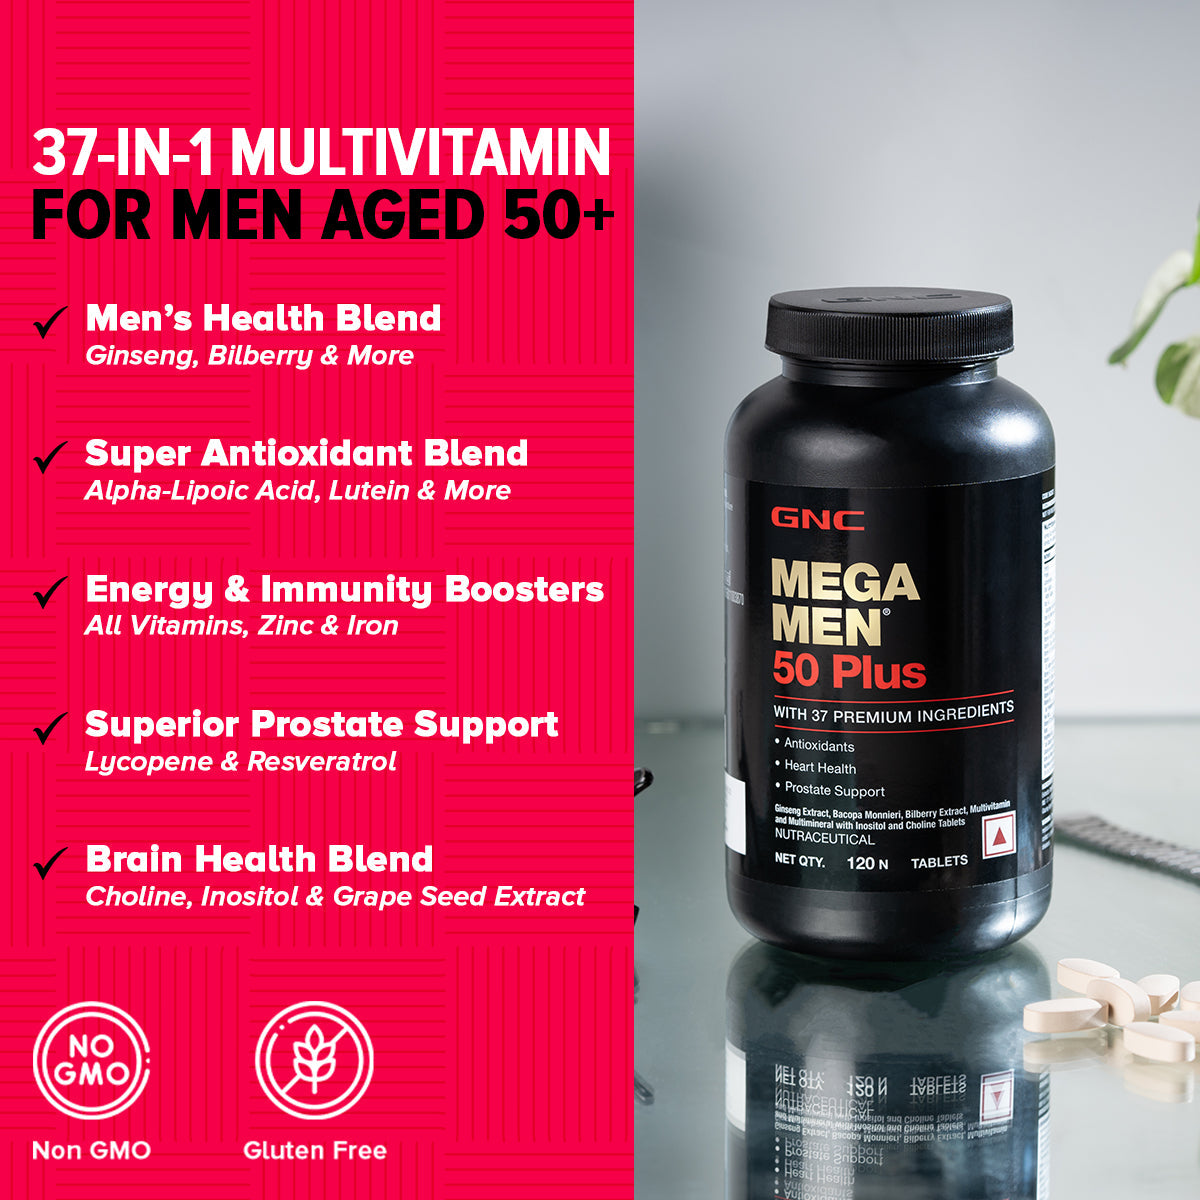 GNC Mega Men 50 Plus Multivitamin -  For Healthy Heart, Prostate Support & Well-Being - 120 Tablets